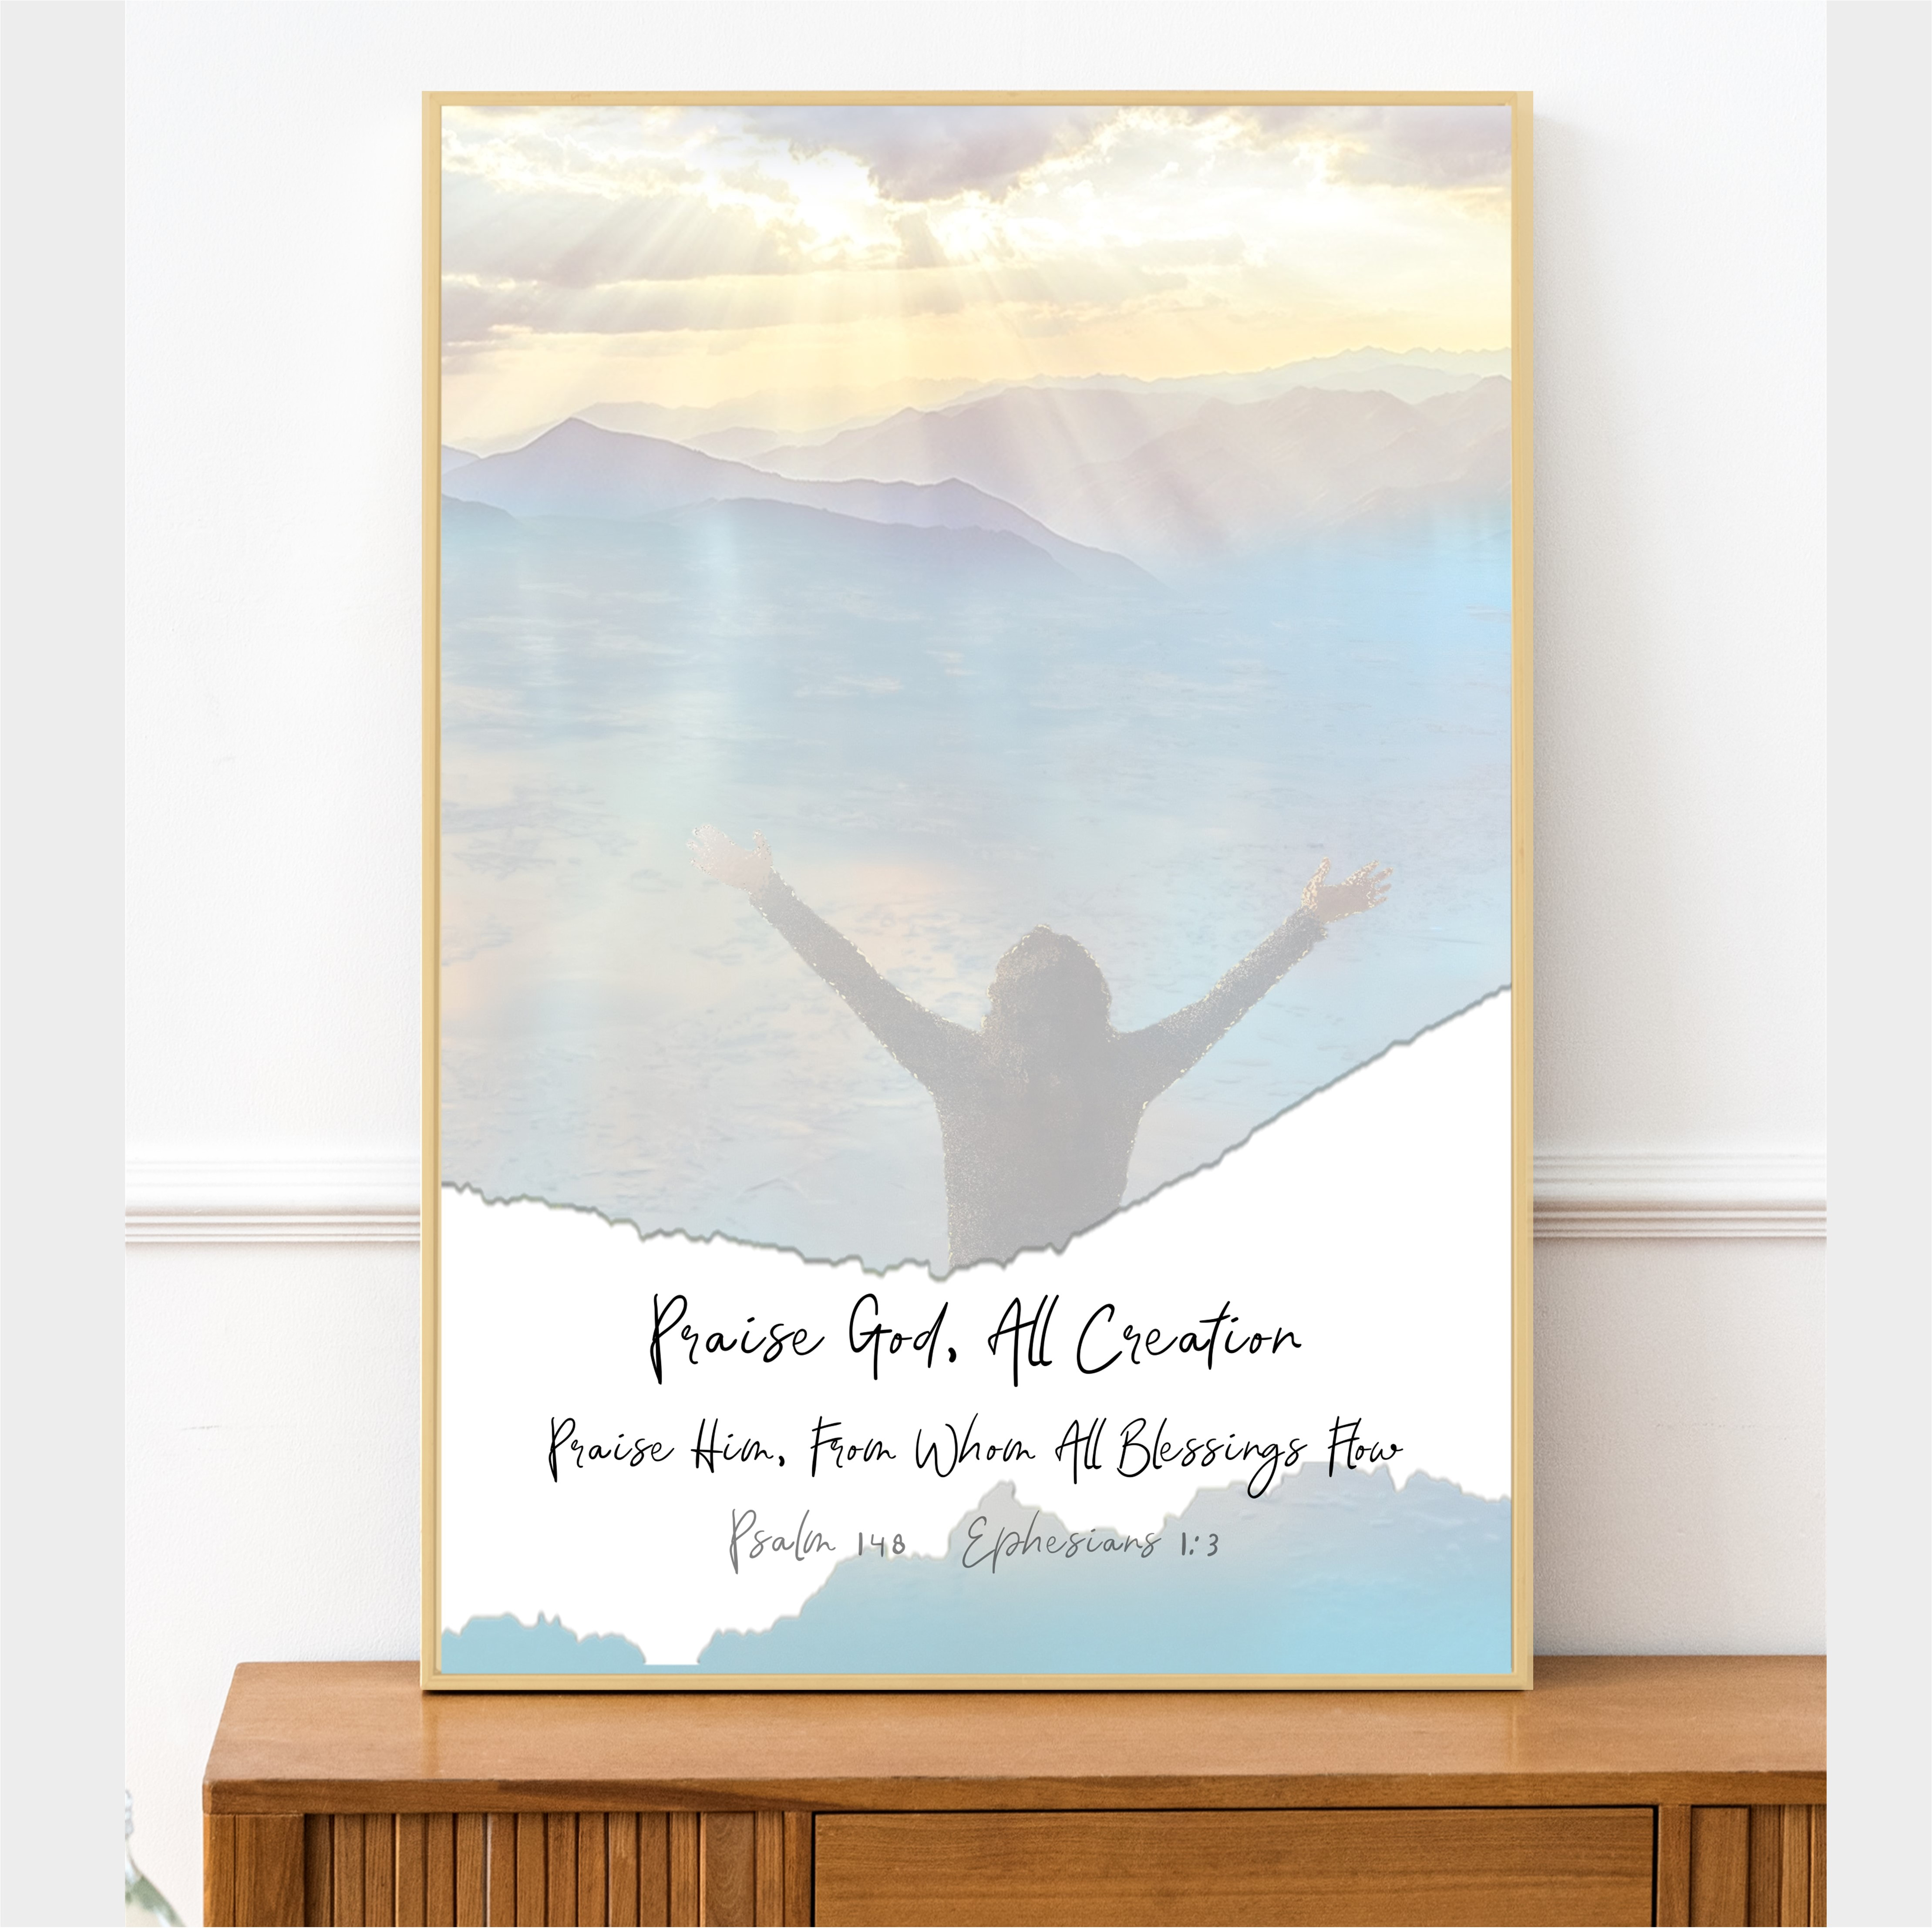 Psalm 148 Comes in 2 sizes Praise Him From Whom All Blessings Flow Ephesians 1:3 PRAISE GOD All CREATION 18x24 and 24x36 inches